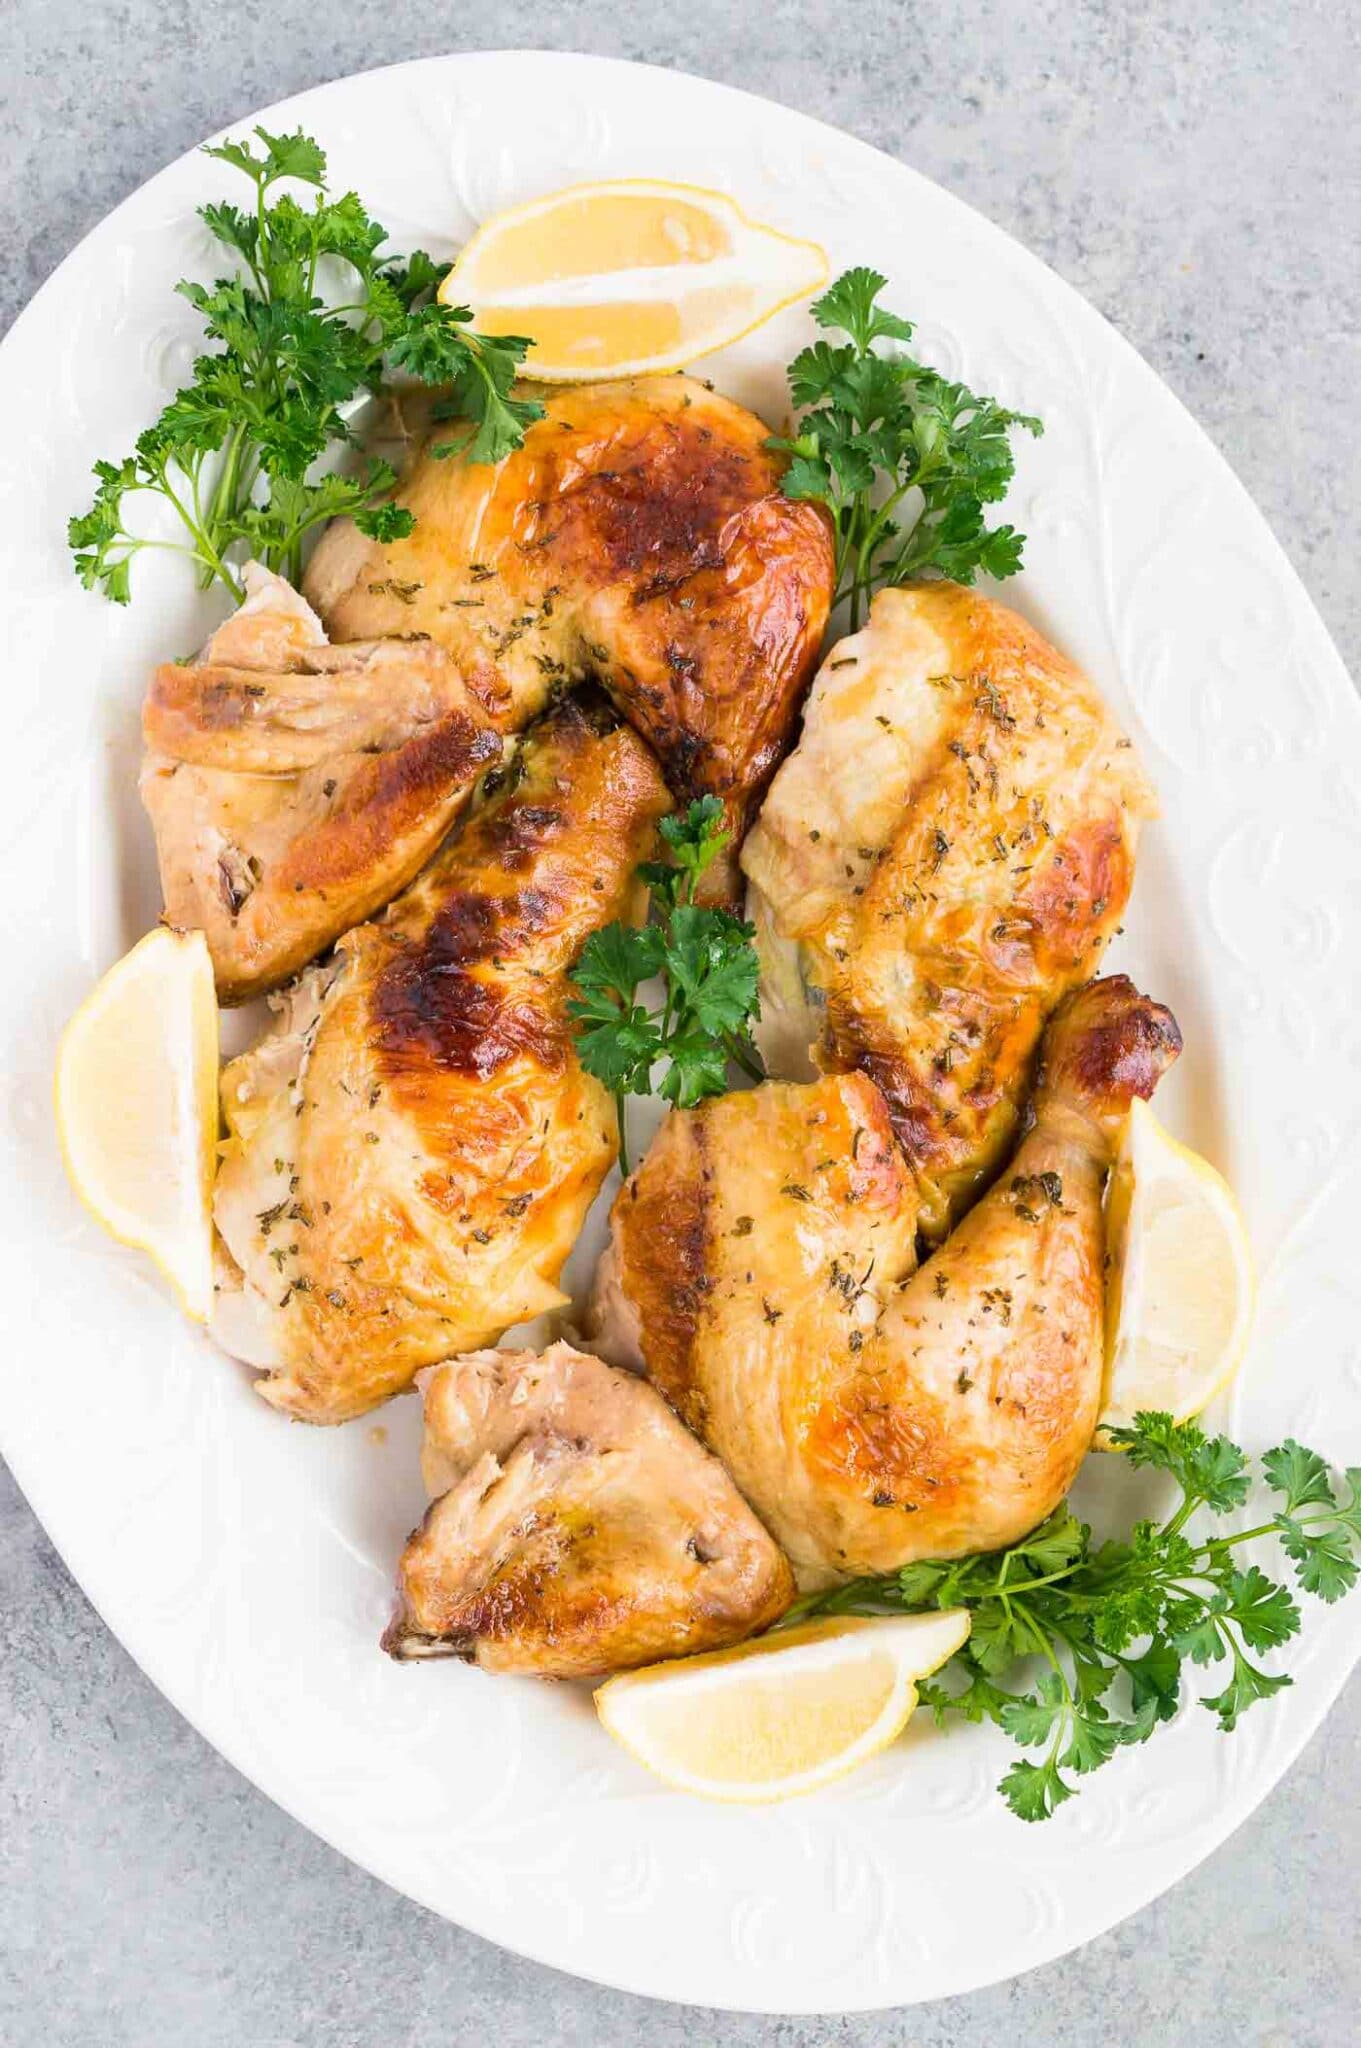 juicy and tender roasted chicken on a platter